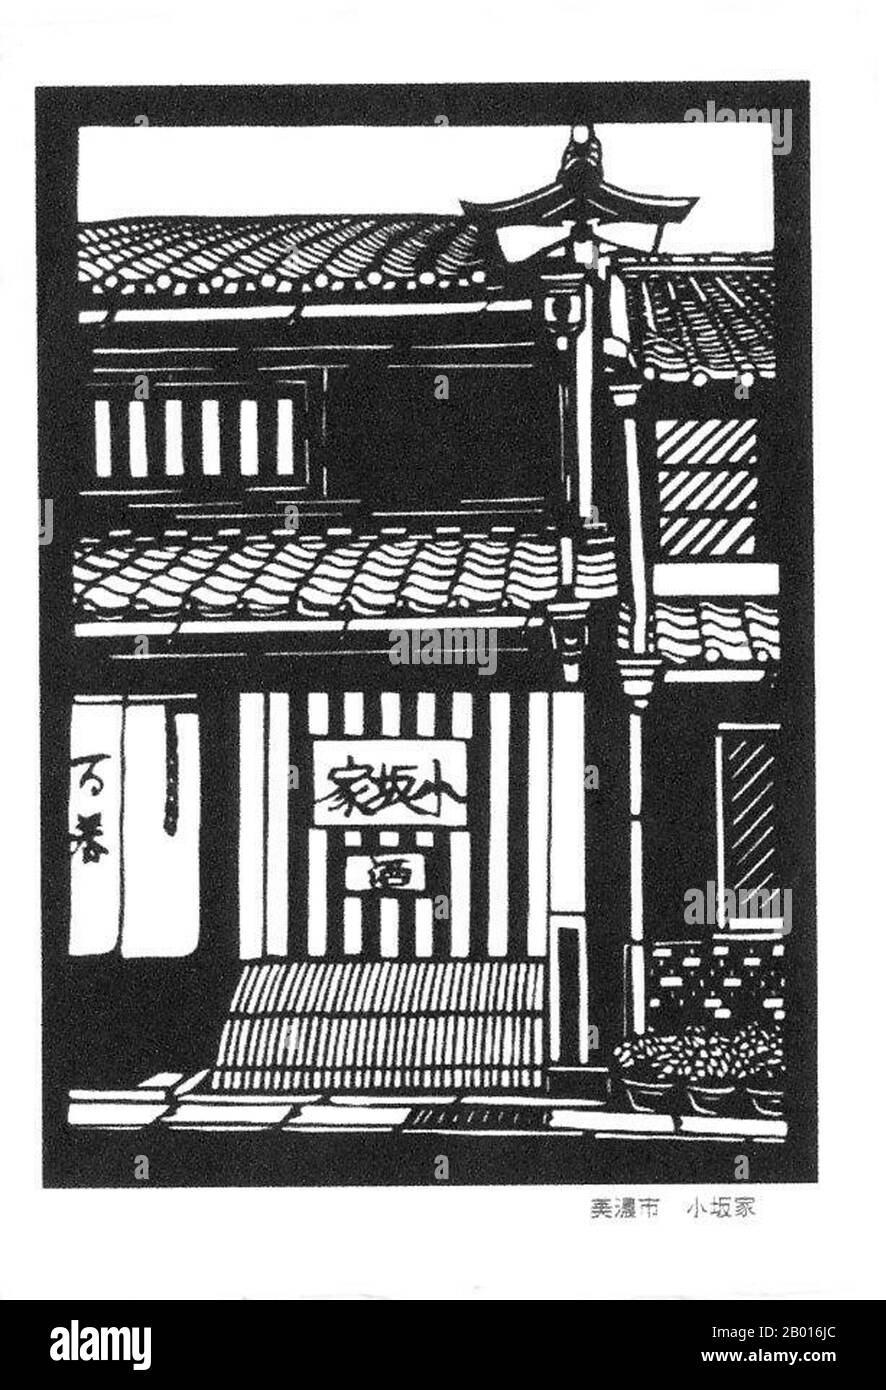 Japan: 'Old Edo Period Buildings in Mino City, Gifu Prefecture'. Ukiyo-e woodblock print, early 20th century.  Mino is a city located in the Gifu Prefecture of central Japan. The city is renowned for traditional Japanese Mino washi paper and its streets, which are in the style of the early Edo period (1603-1868). Stock Photo